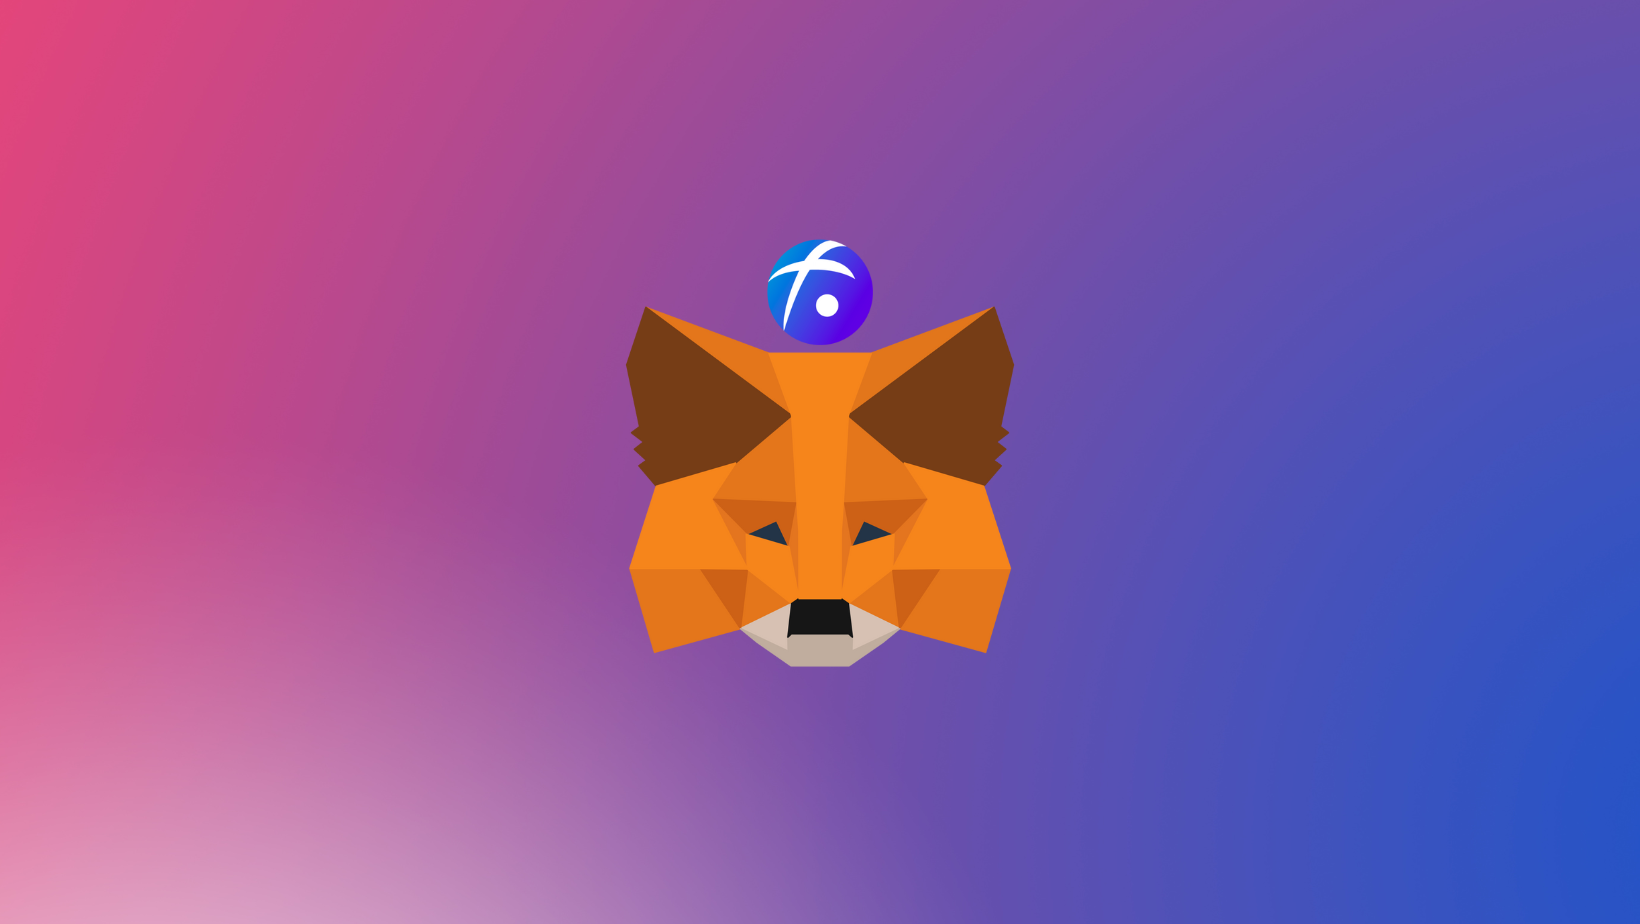 How to add Fusion (FSN) to MetaMask